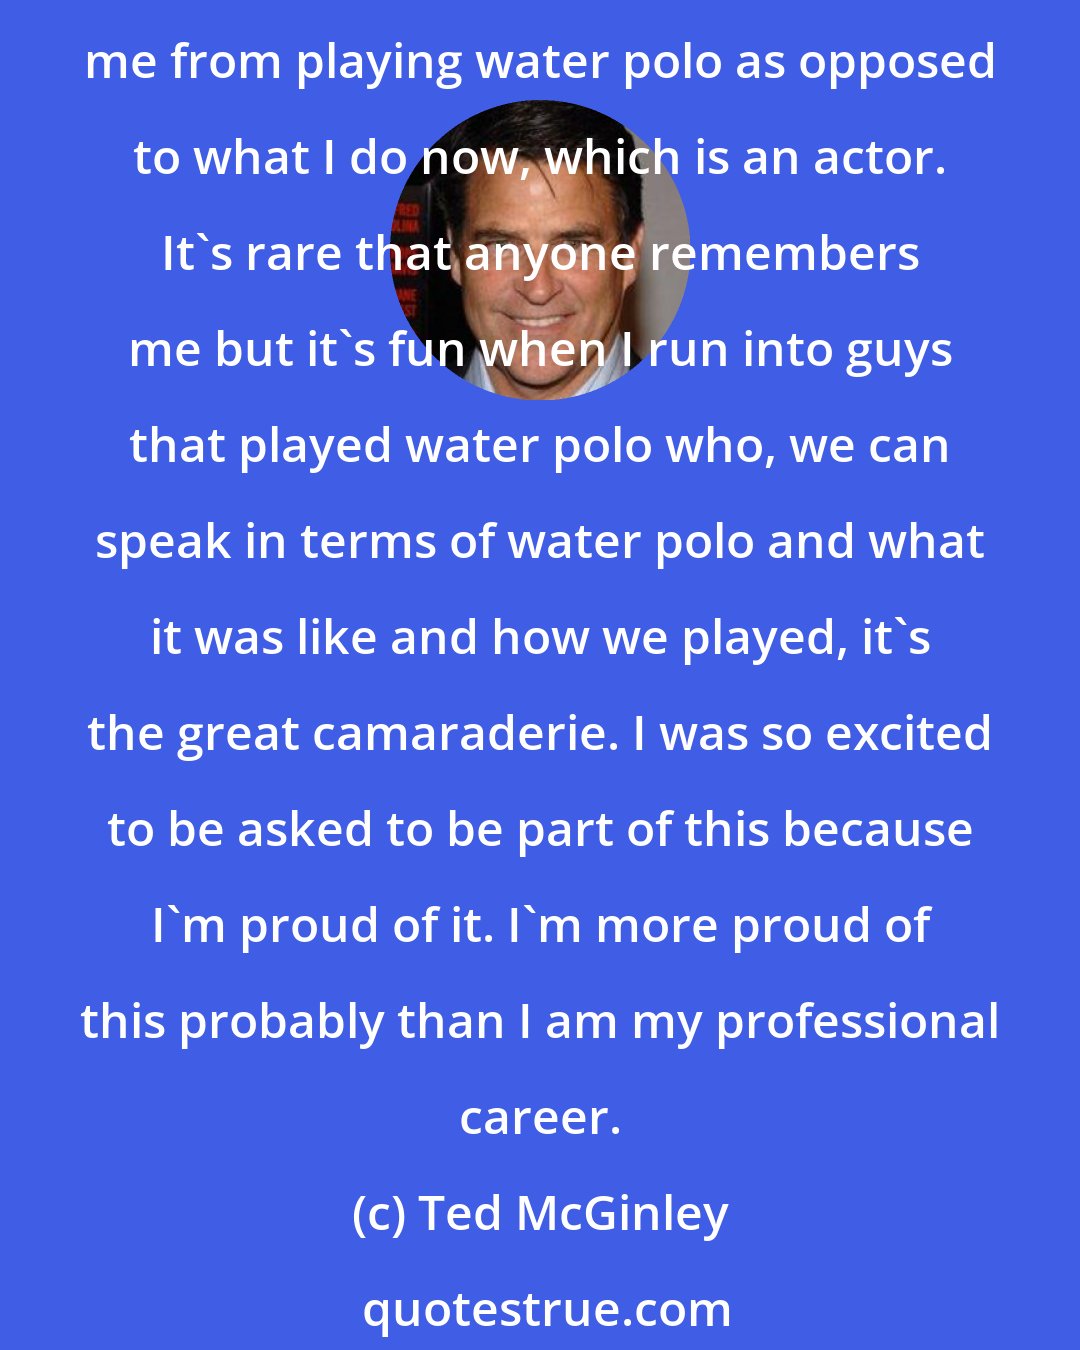 Ted McGinley: I'm so proud of the time I put in the pool, so proud of the people I met along way, just to be asked to do this was exciting for me. I love it when I run into people who remember me from playing water polo as opposed to what I do now, which is an actor. It's rare that anyone remembers me but it's fun when I run into guys that played water polo who, we can speak in terms of water polo and what it was like and how we played, it's the great camaraderie. I was so excited to be asked to be part of this because I'm proud of it. I'm more proud of this probably than I am my professional career.